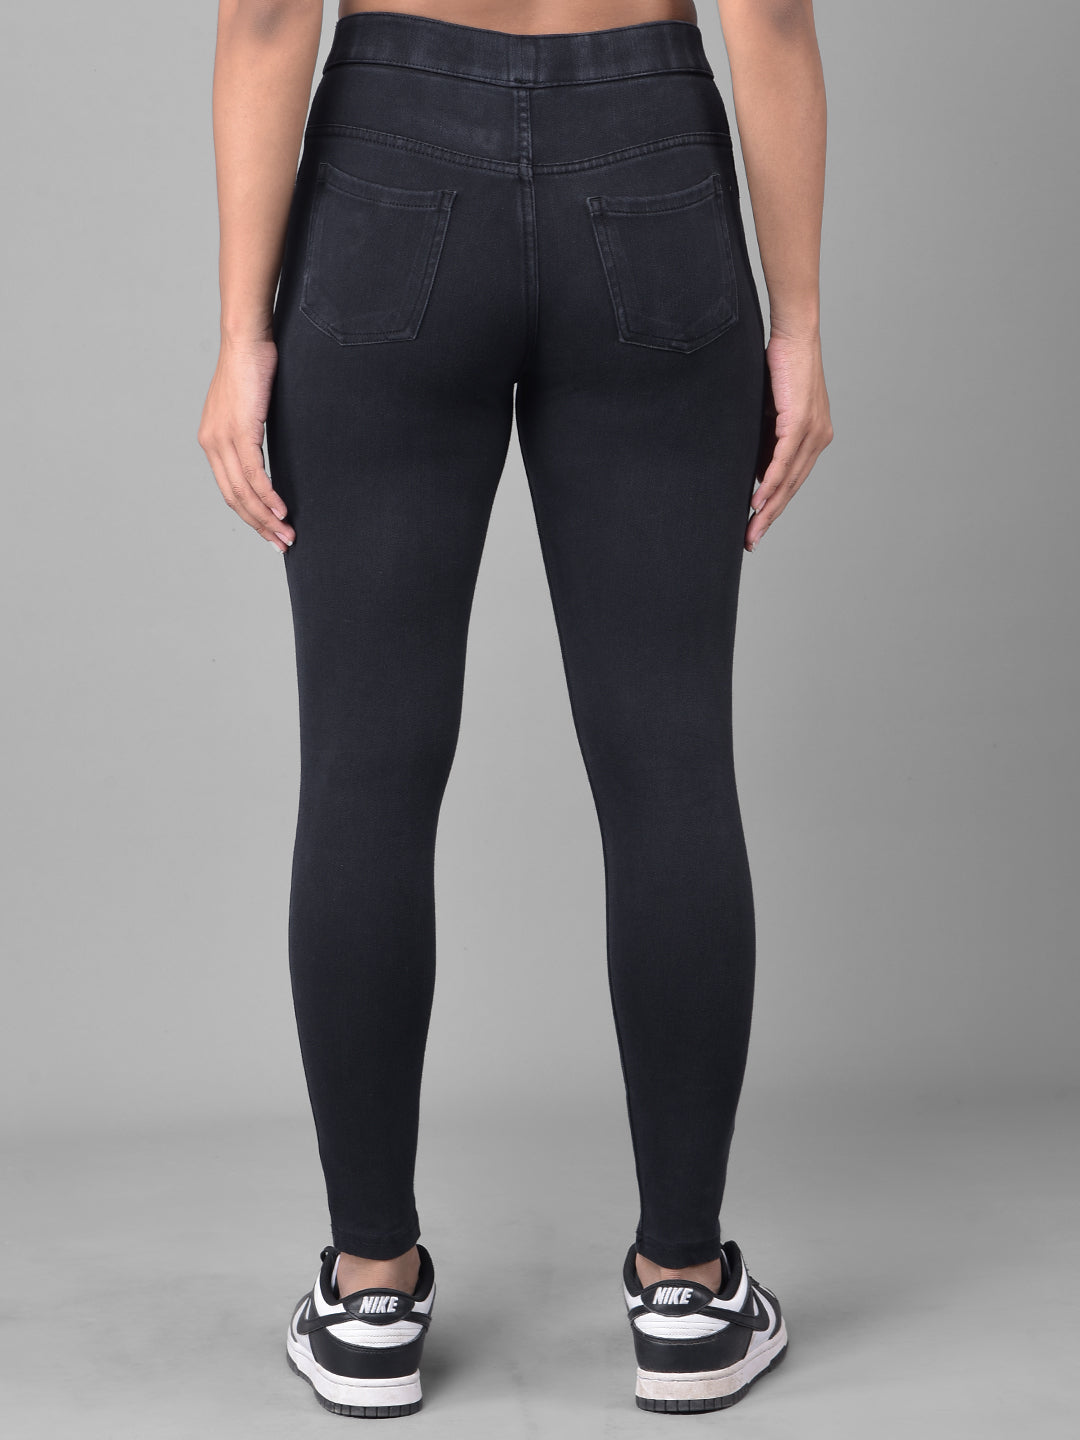 Comfort Lady Leggings Photos, New Alipore, kolkata- Pictures & Images  Gallery - Justdial